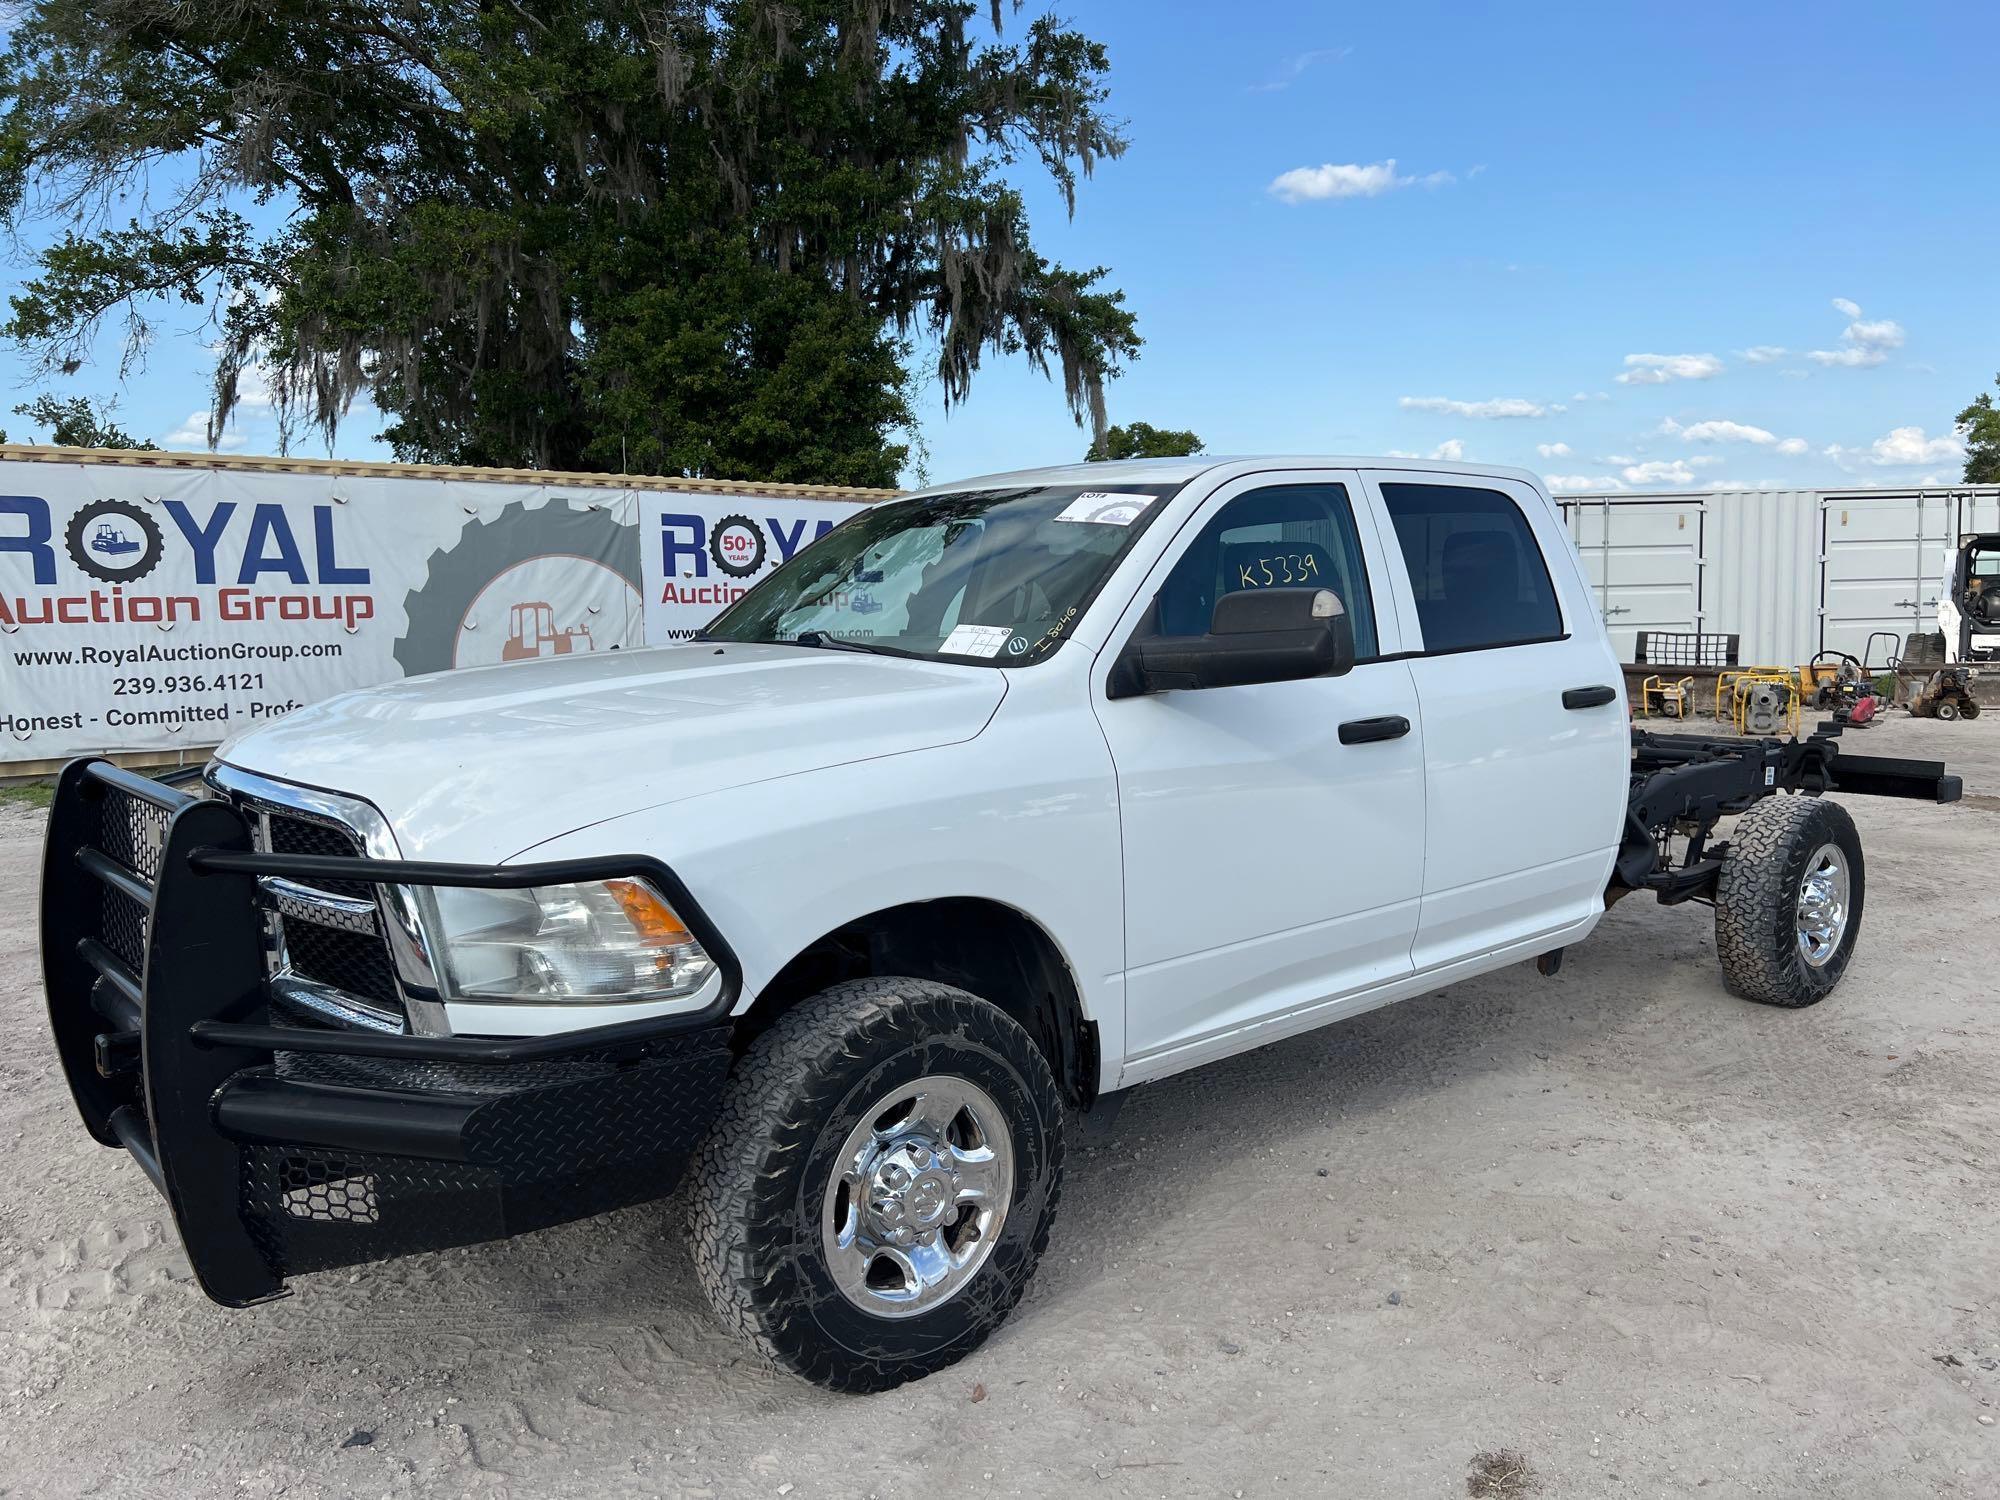 2013 Dodge Ram 4x4 Crew Cab and Chassis